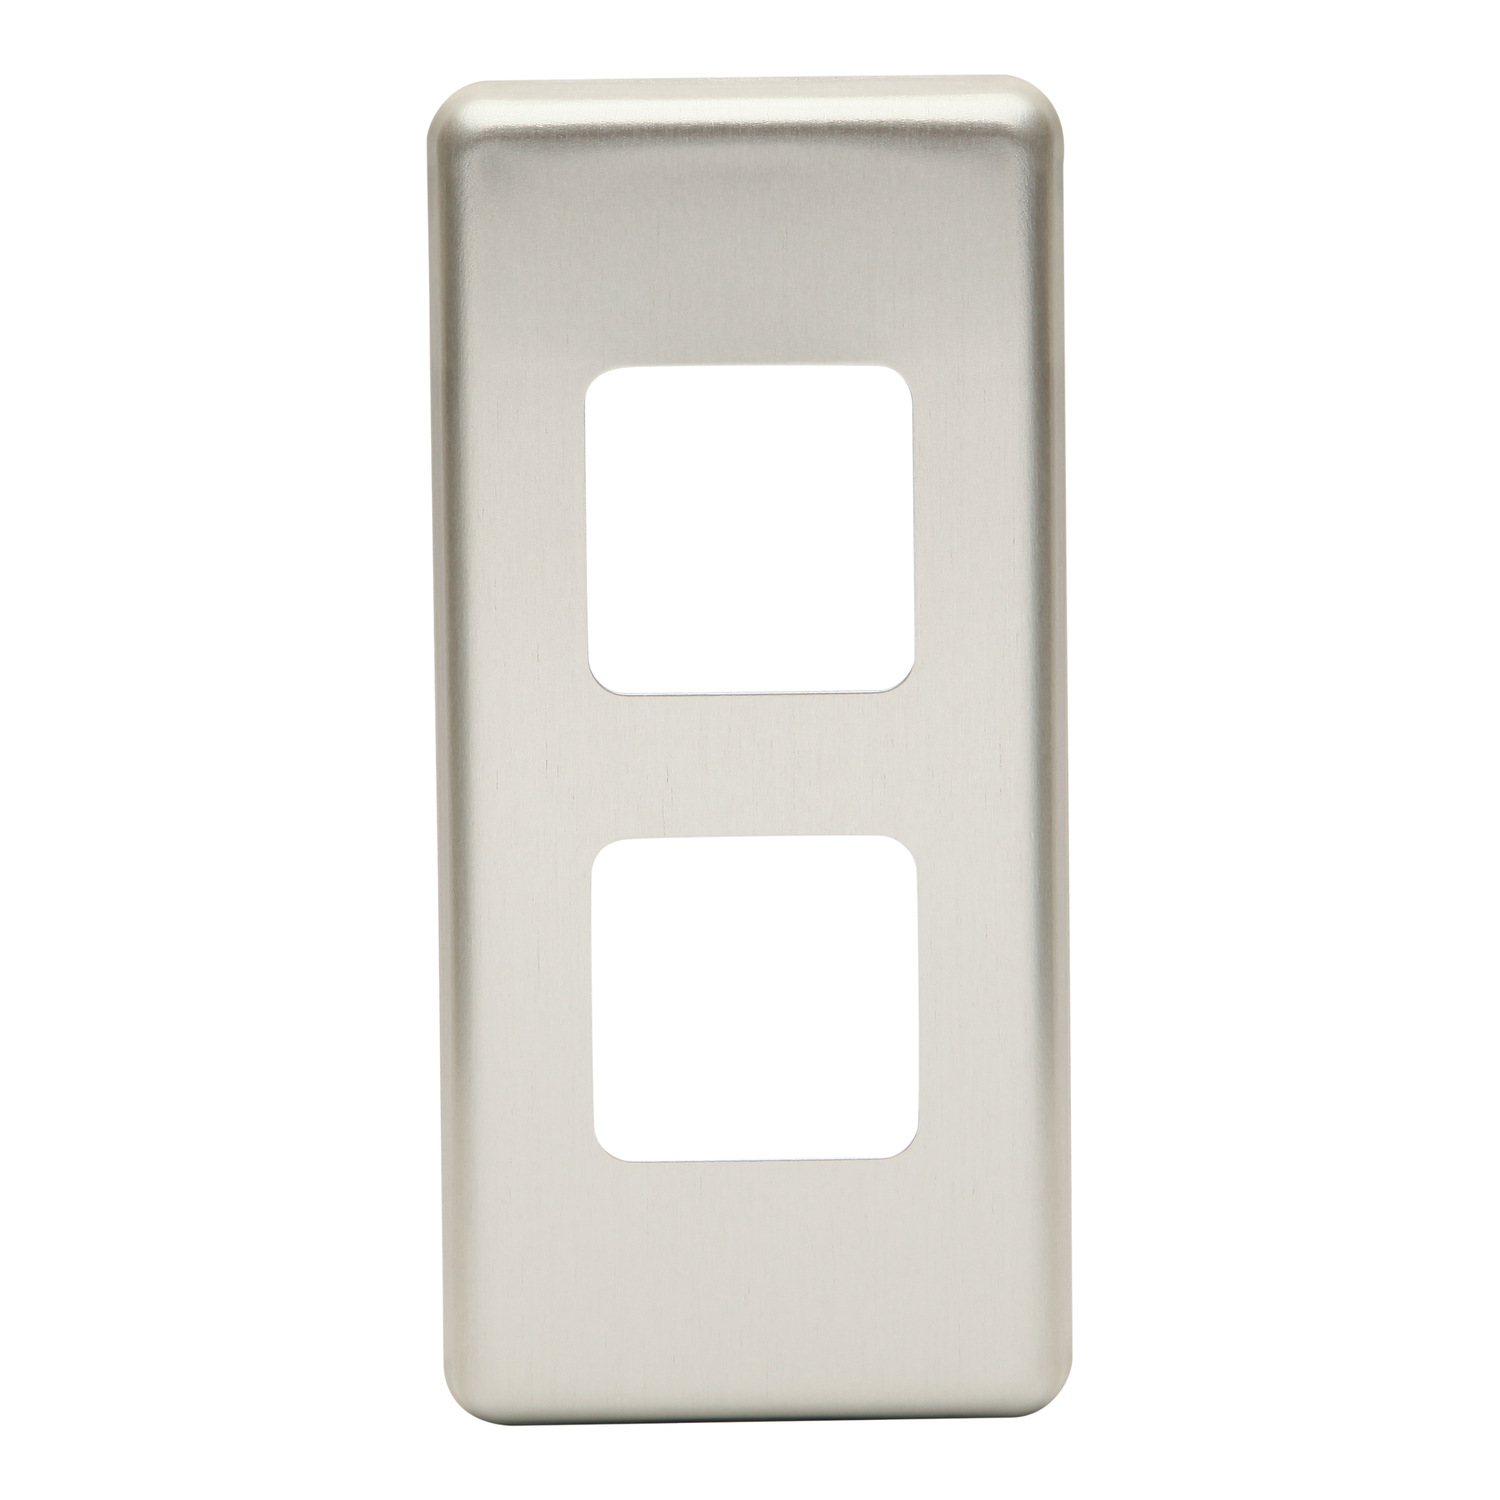 Switch Cover Plate; Metal, For Worktop 2-Apature Switch, Stainless Steel